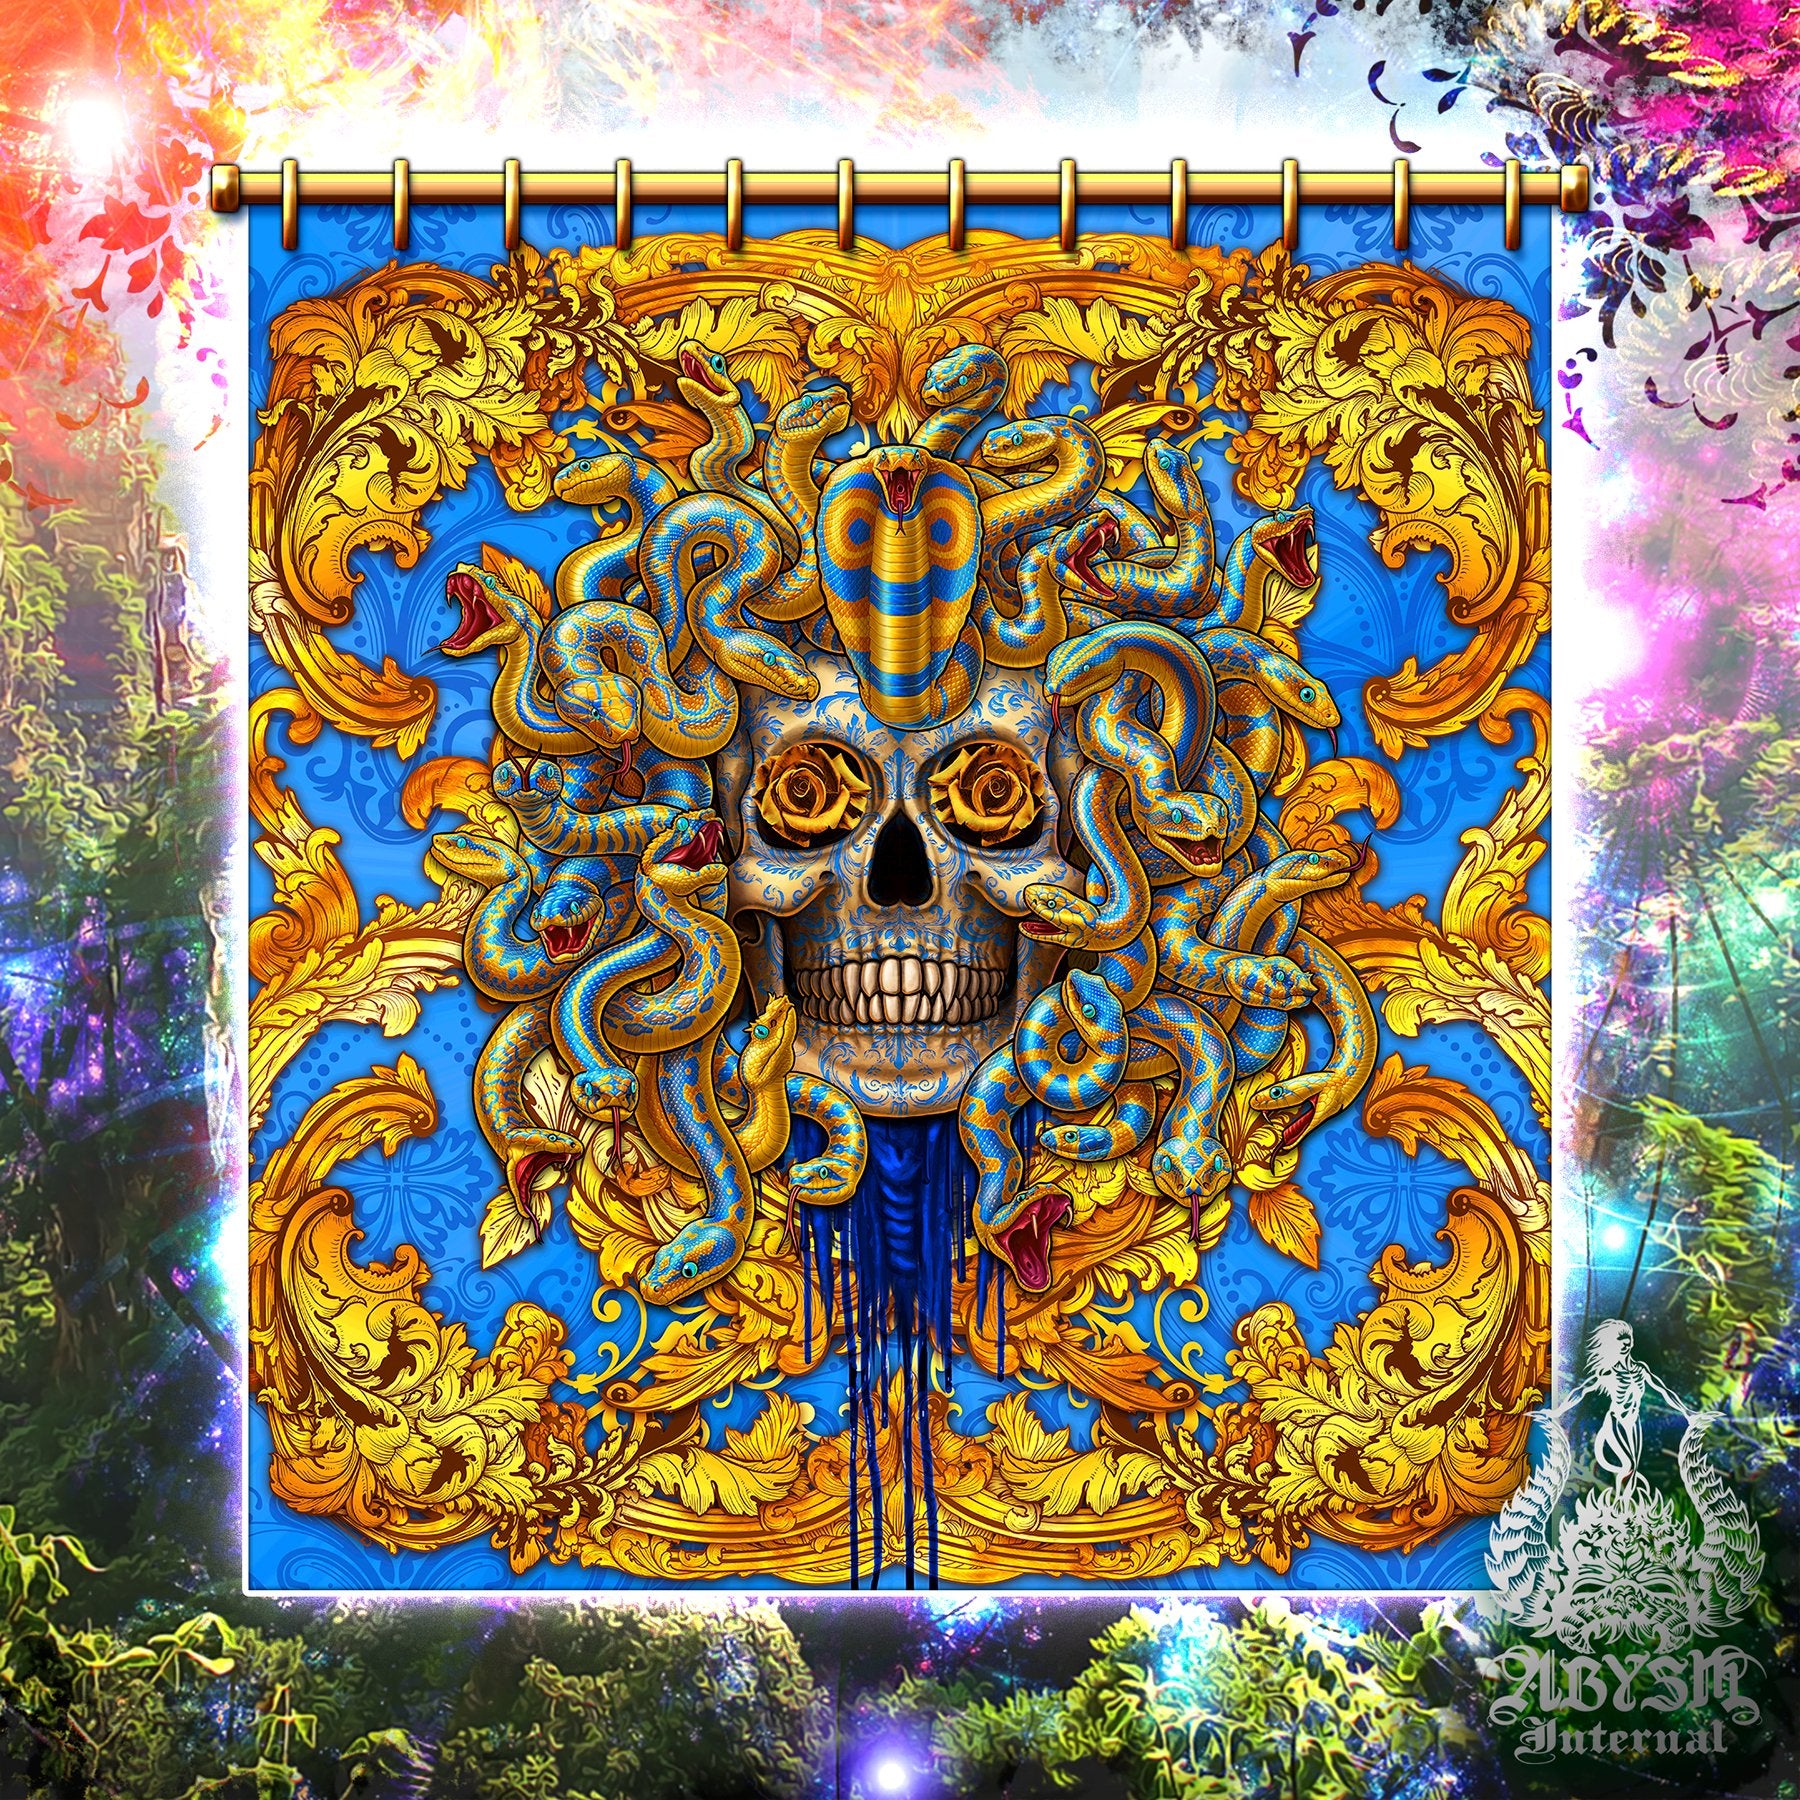 Blue Medusa Shower Curtain, 71x74 inches, Baroque Bathroom Decor, Victorian Ornaments, Eclectic Skull Artm and Funky Home - Cyan & Gold, 2 Faces - Abysm Internal